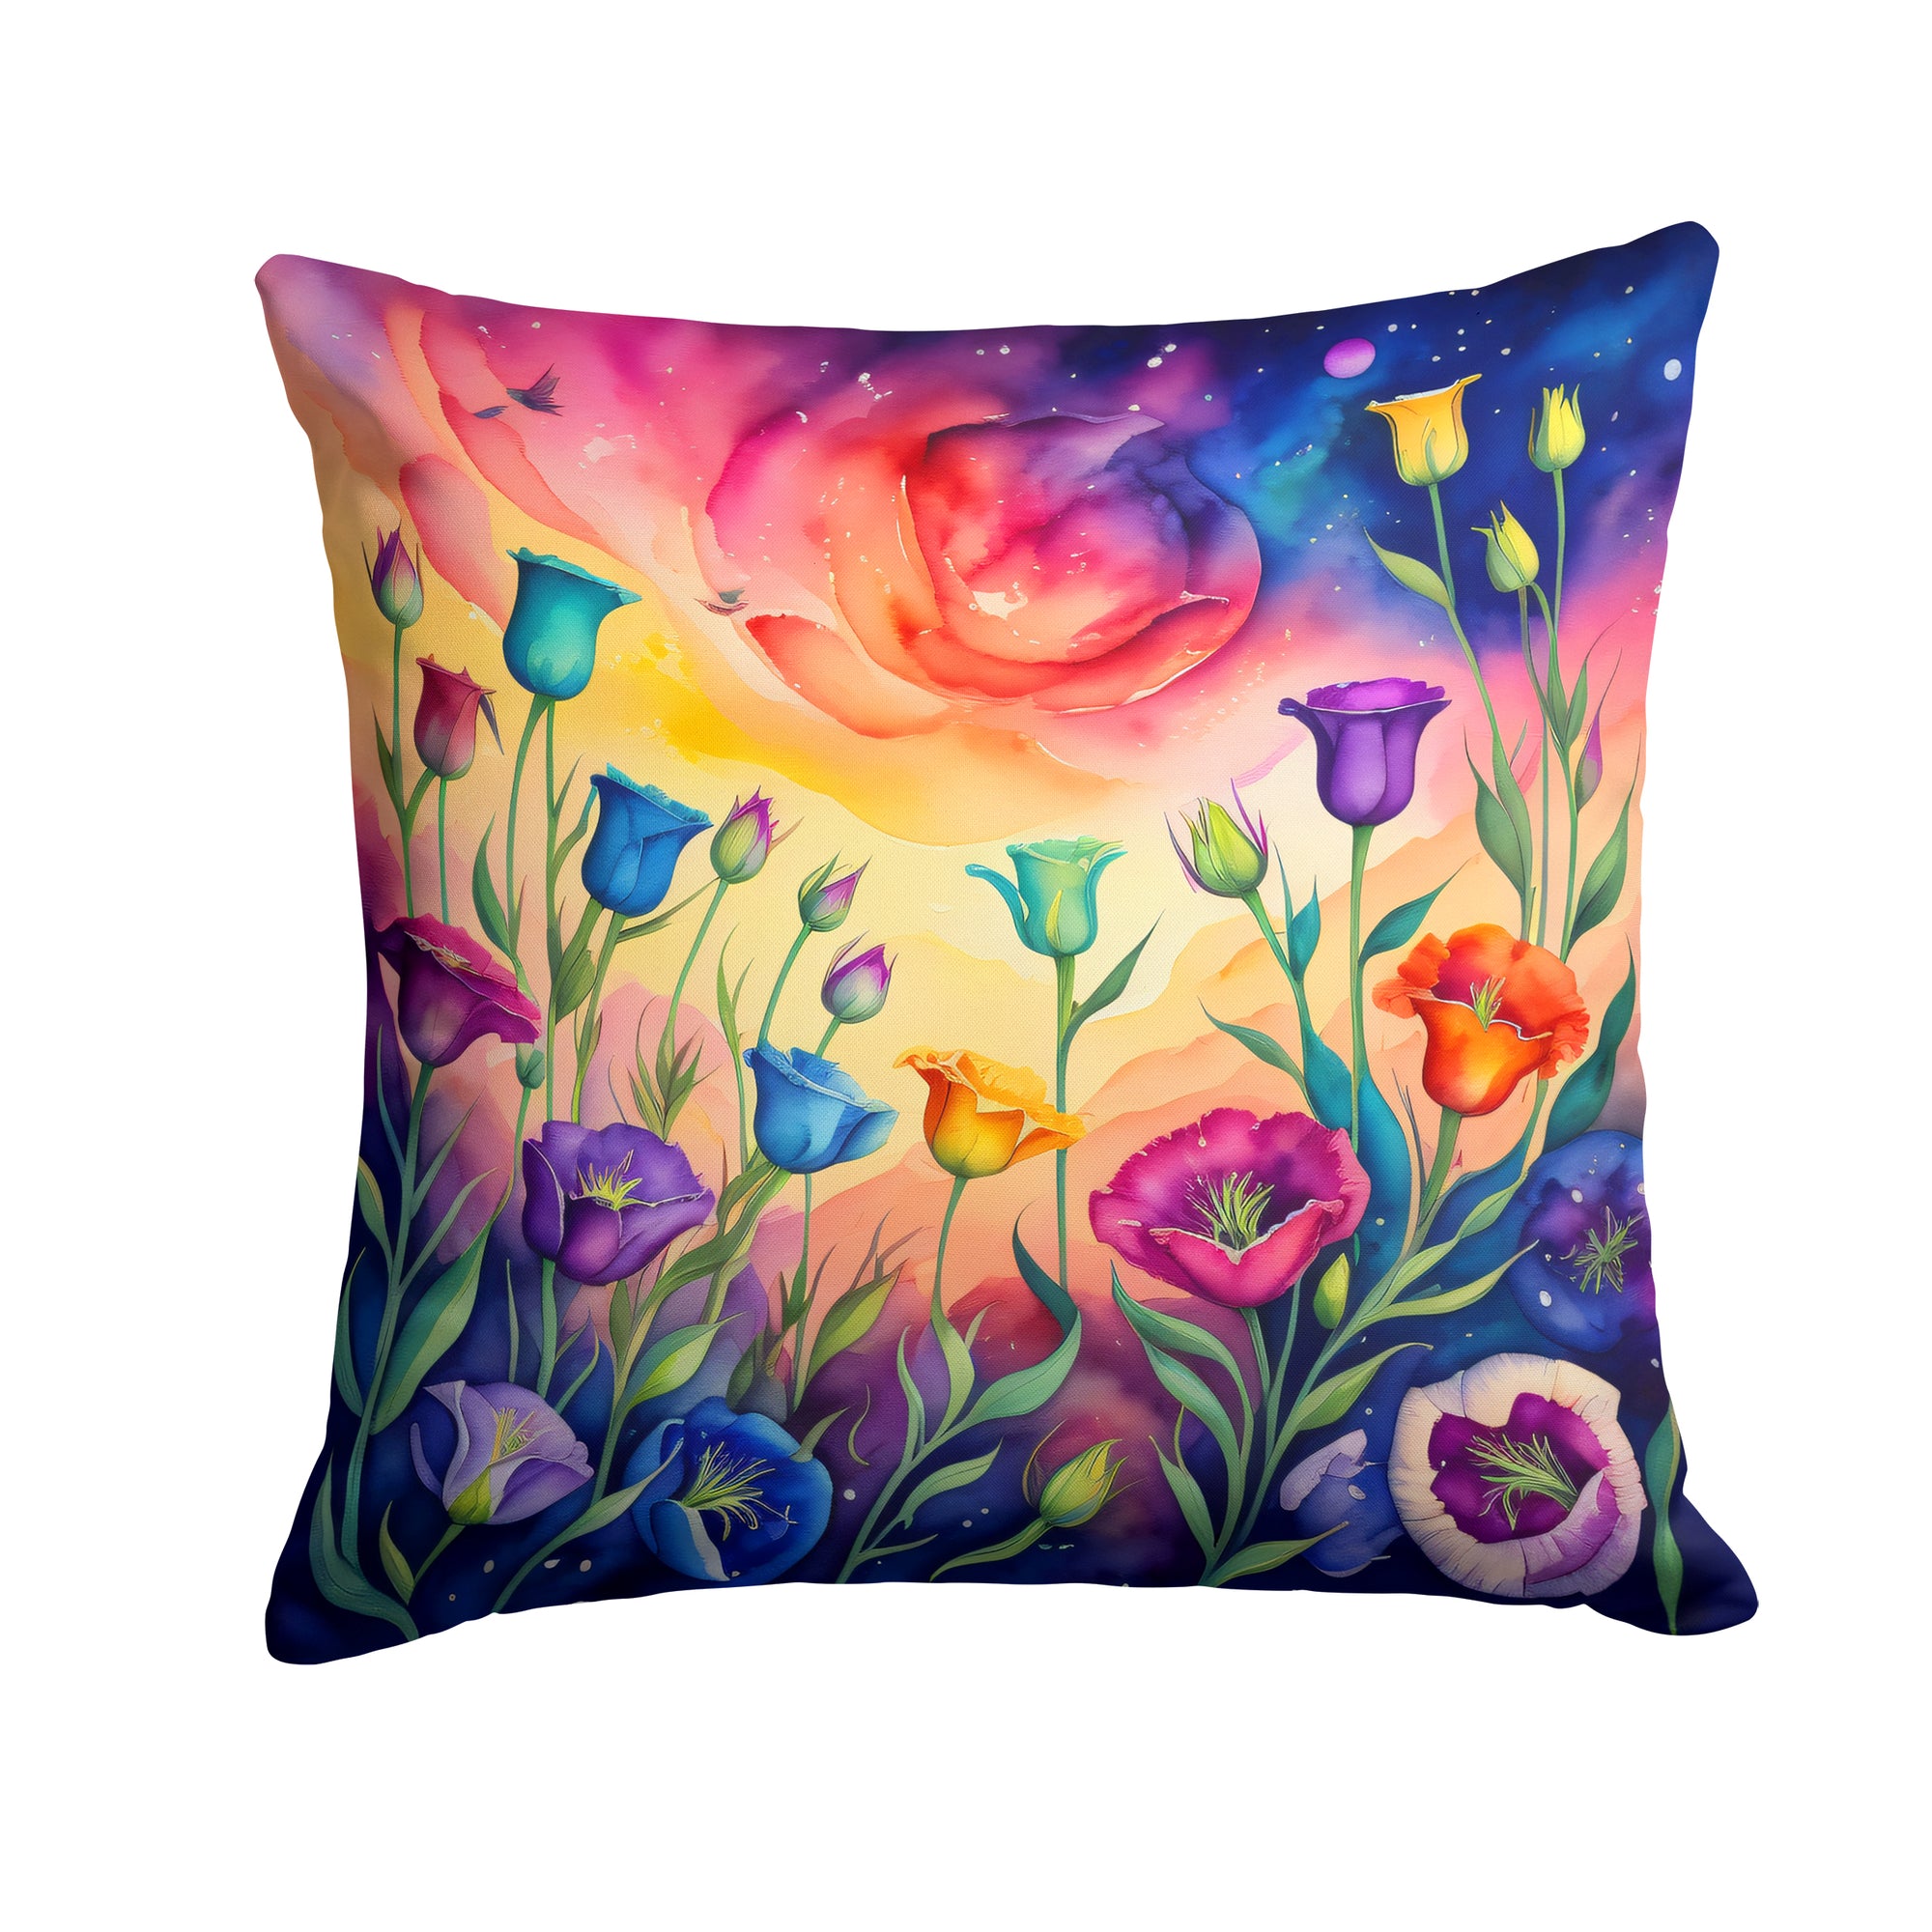 Buy this Colorful Lisianthus Fabric Decorative Pillow